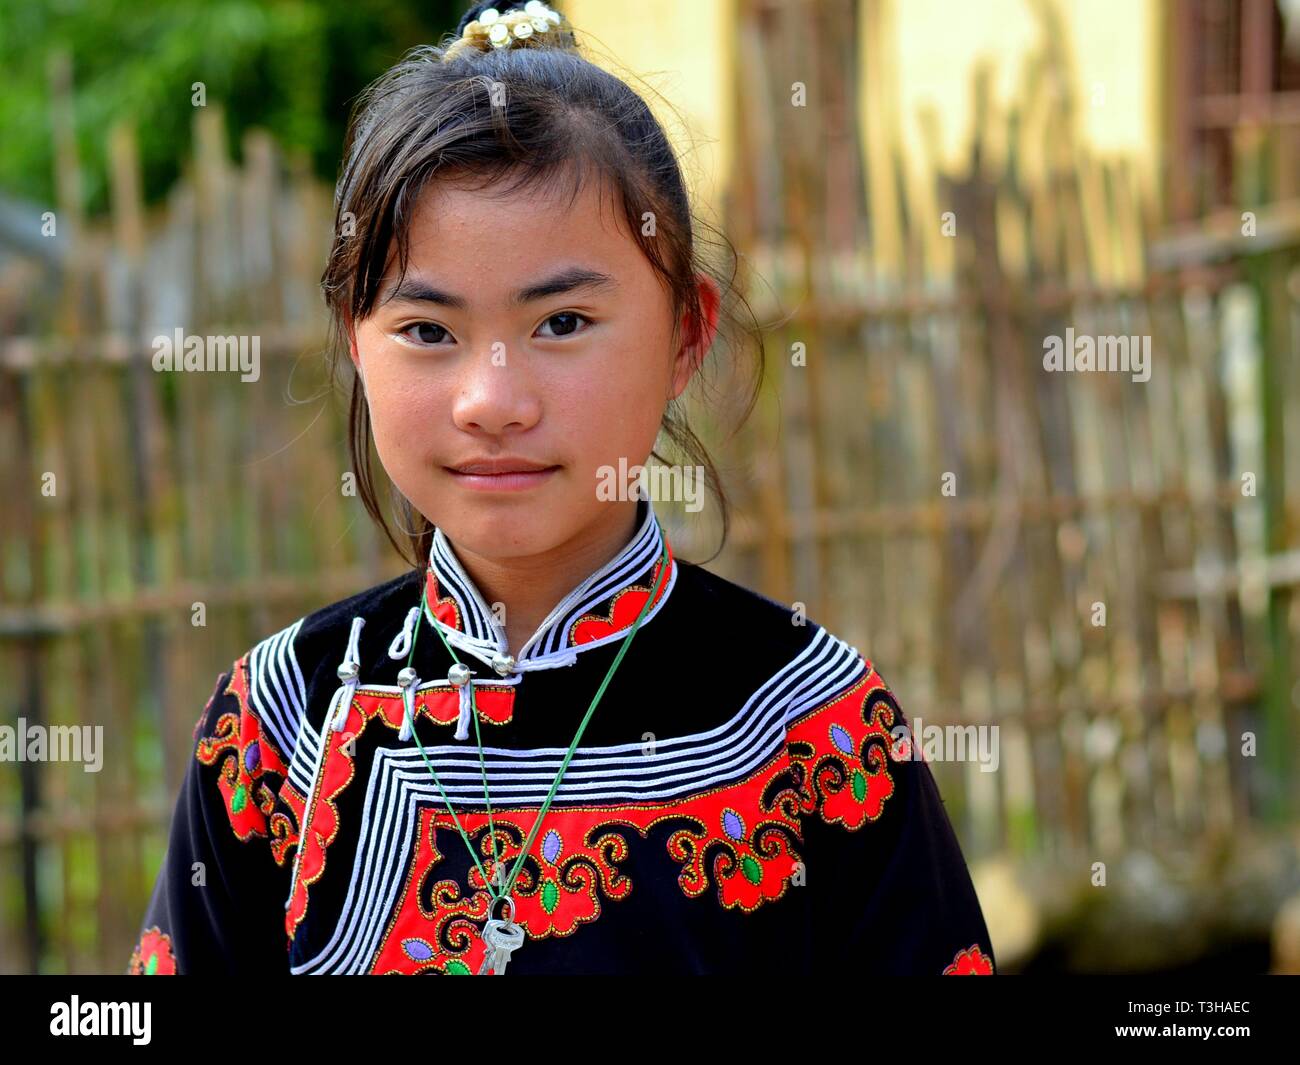 Pretty pre-teen Miao girl (Chinese ethnic minority) wears a red and black traditional ethnic dress and smiles for the camera. Stock Photo